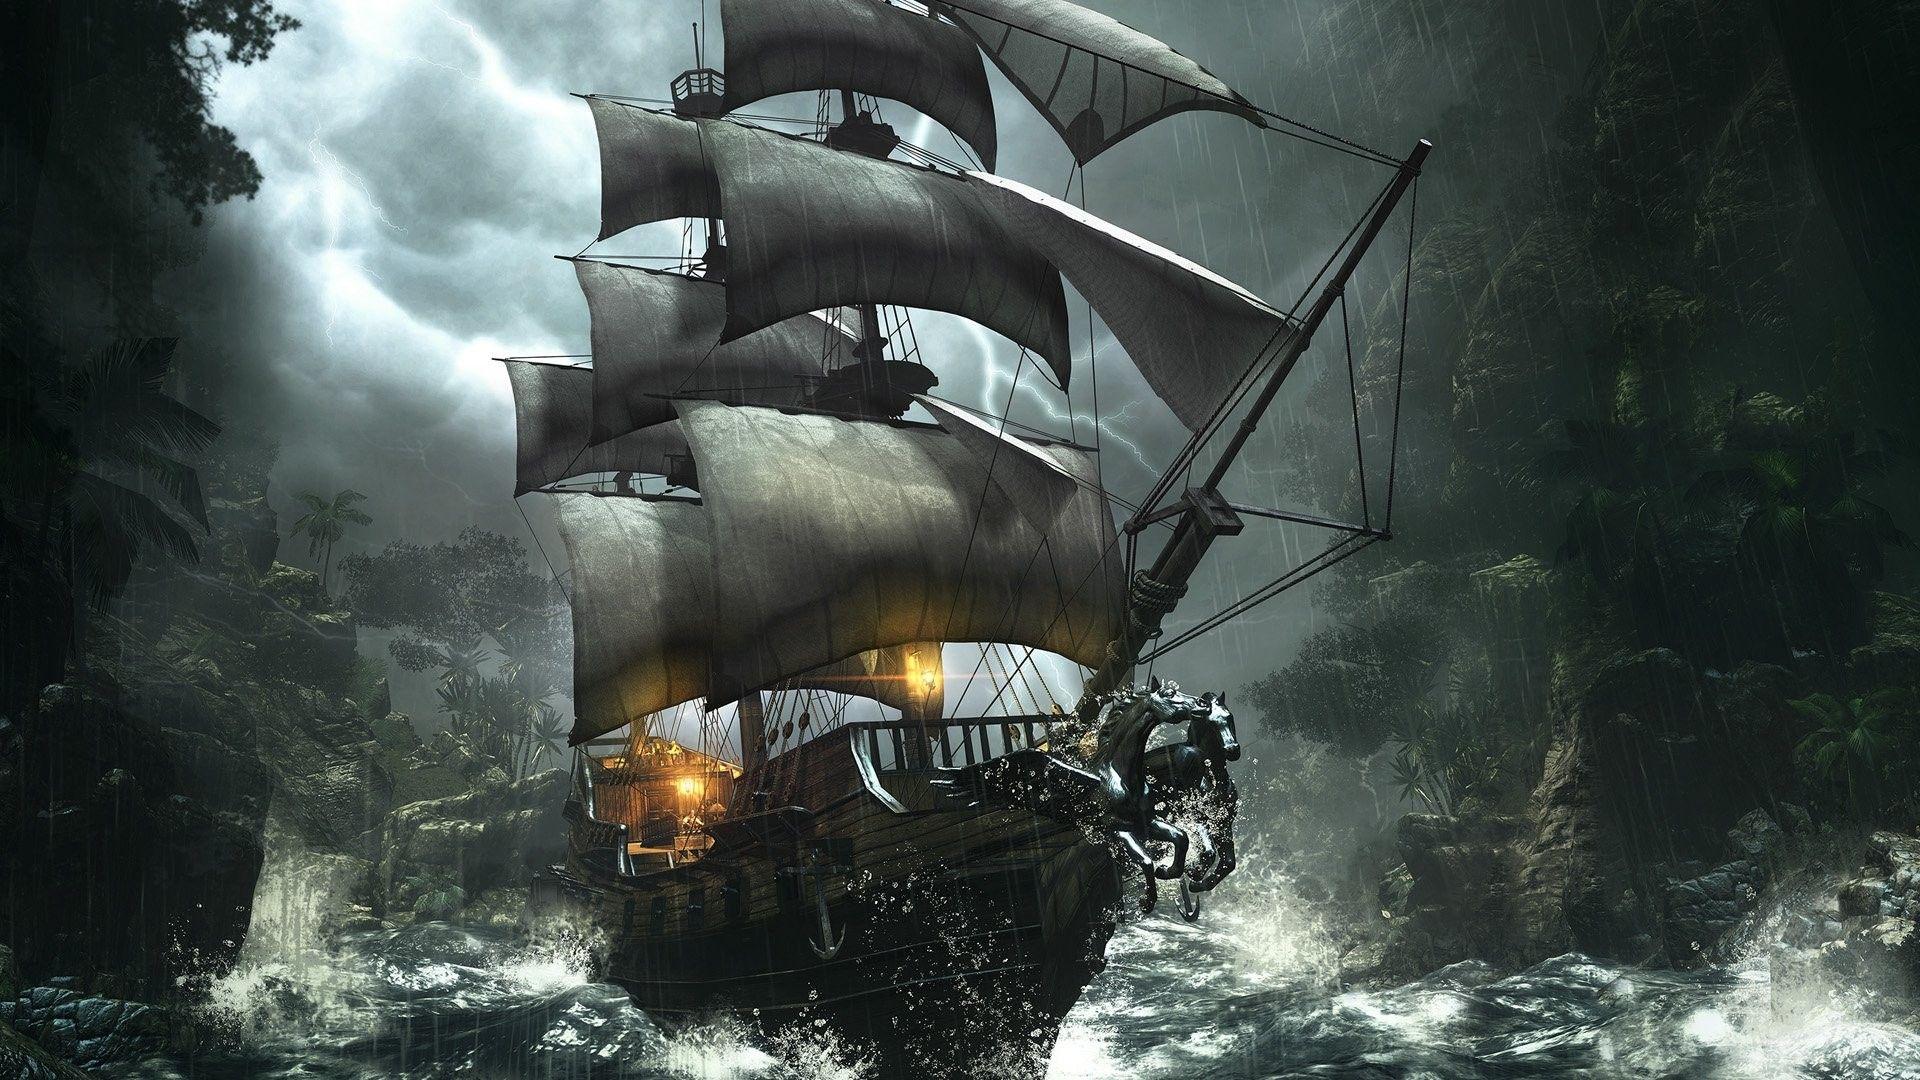 Pirate Ship 4K Wallpapers - Top Free Pirate Ship 4K Backgrounds